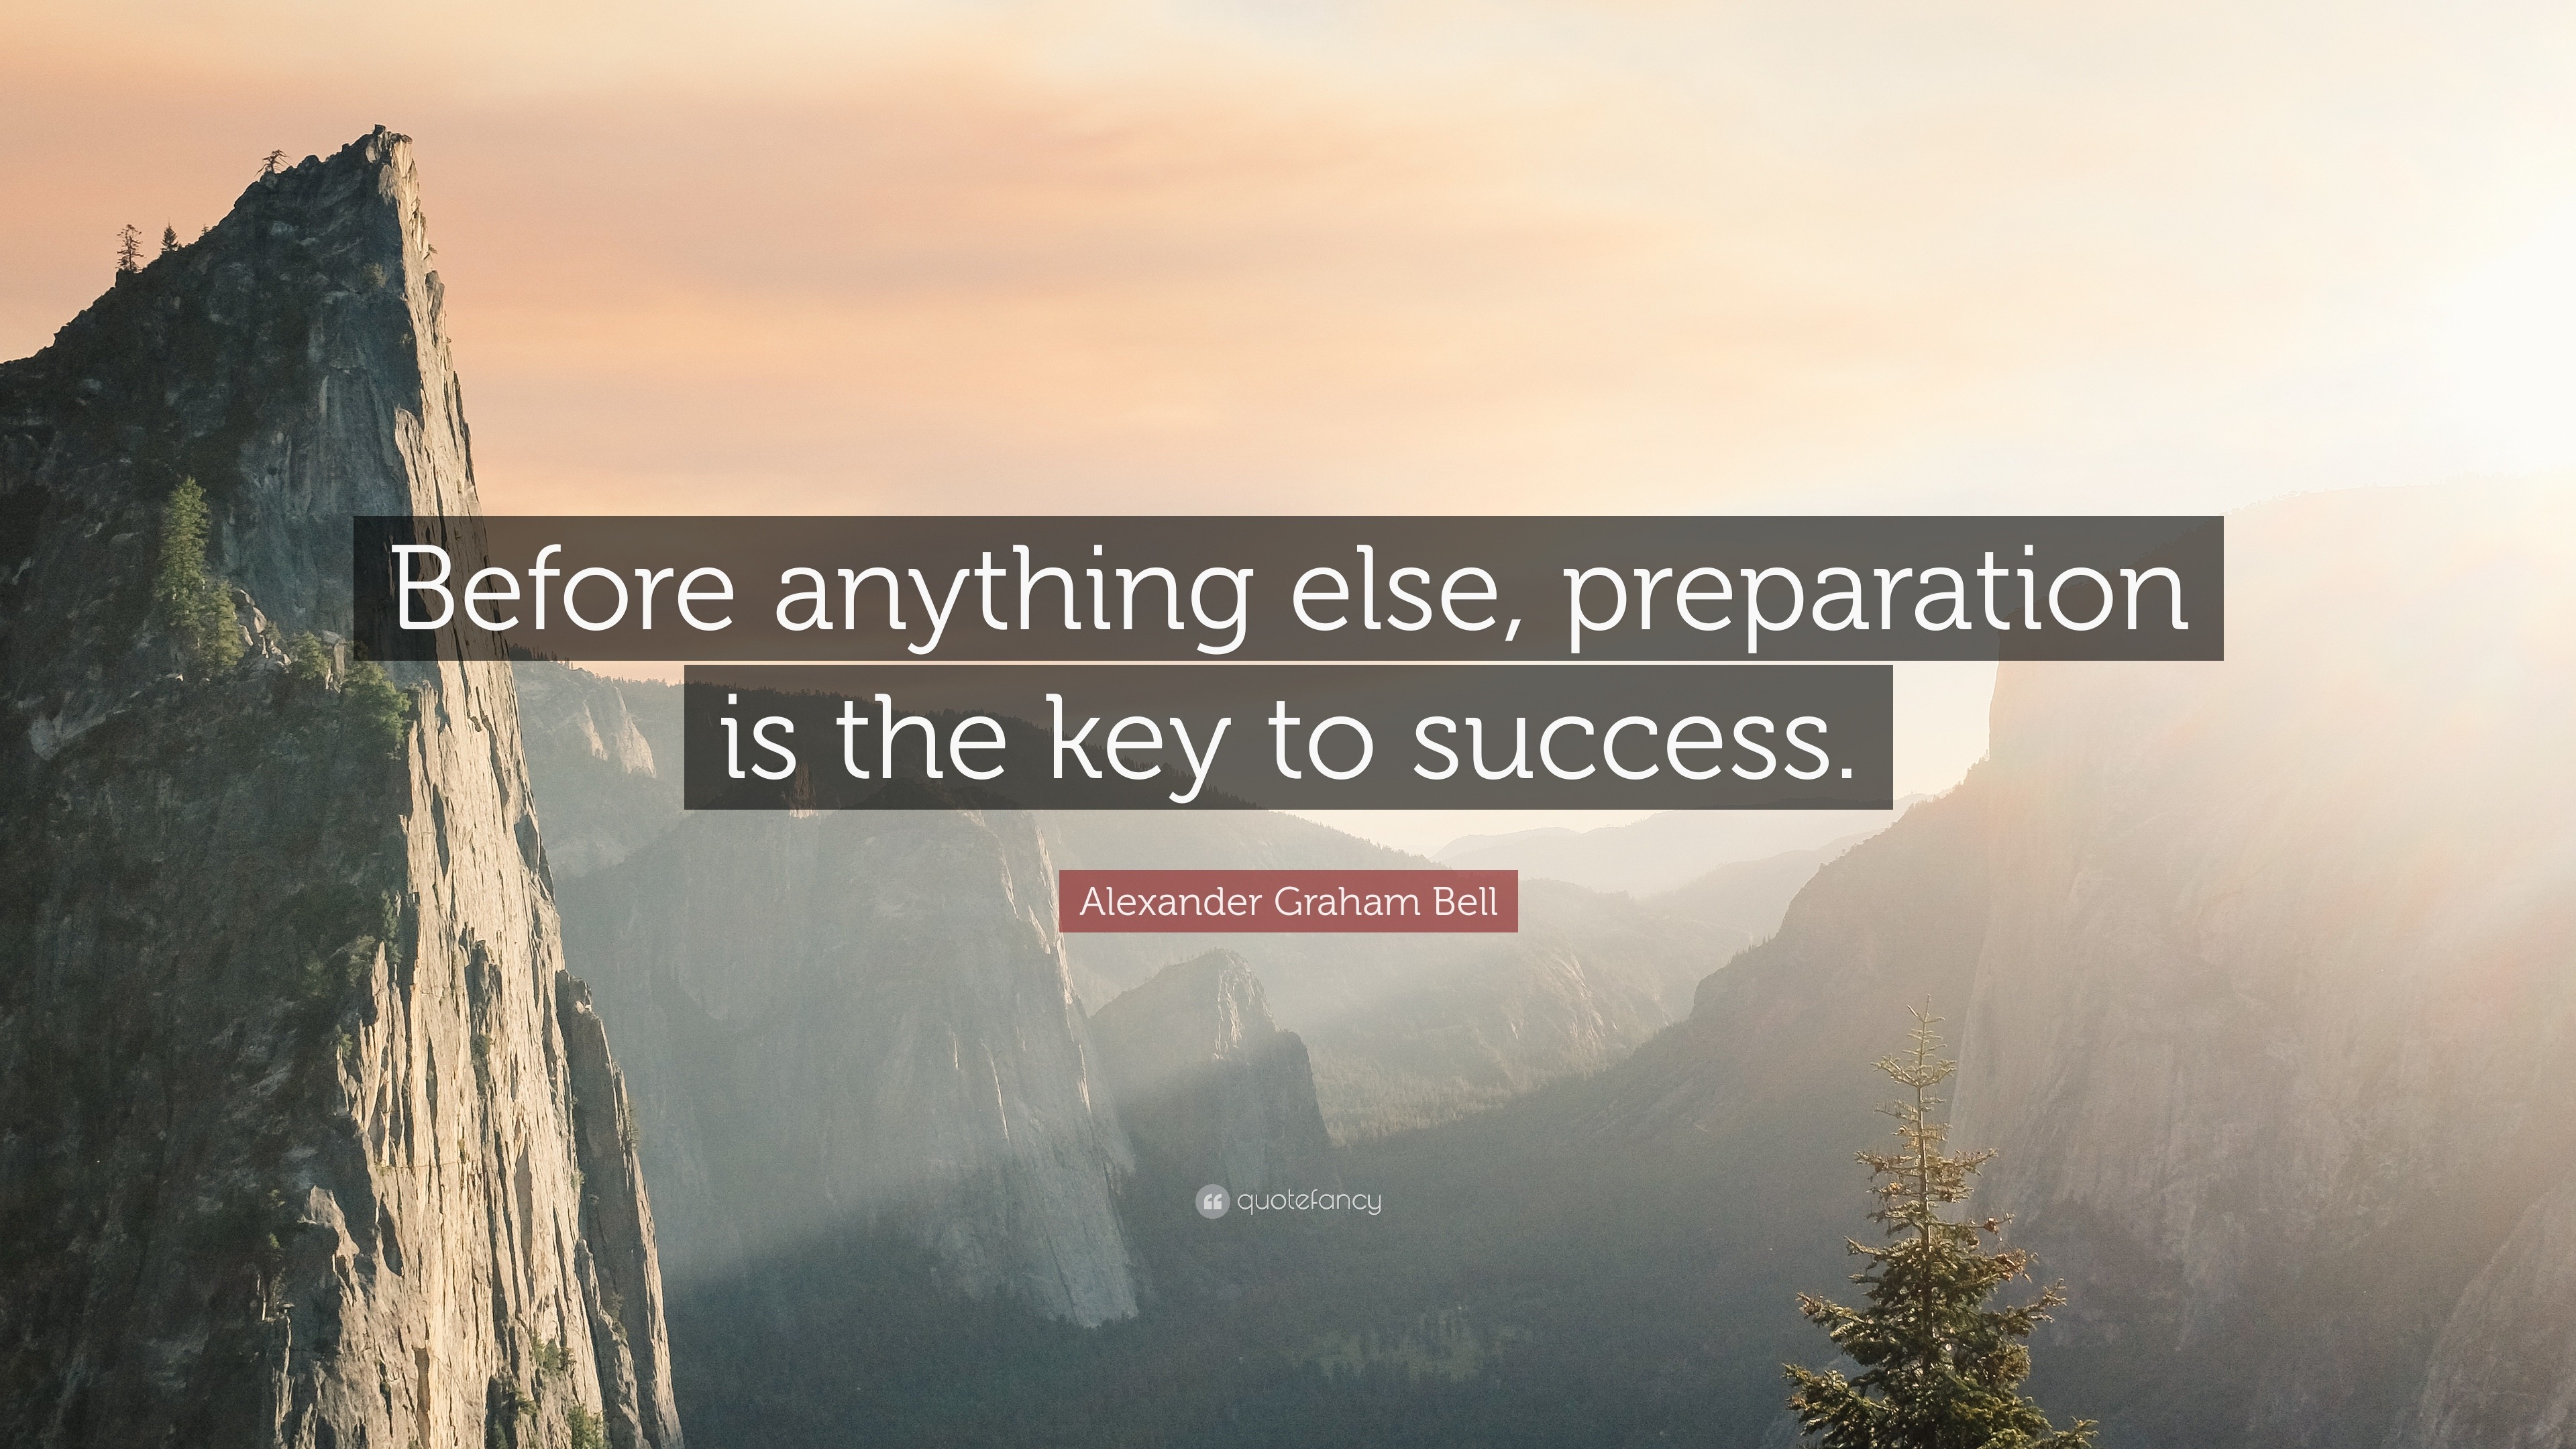 Preparation is the key to success essay